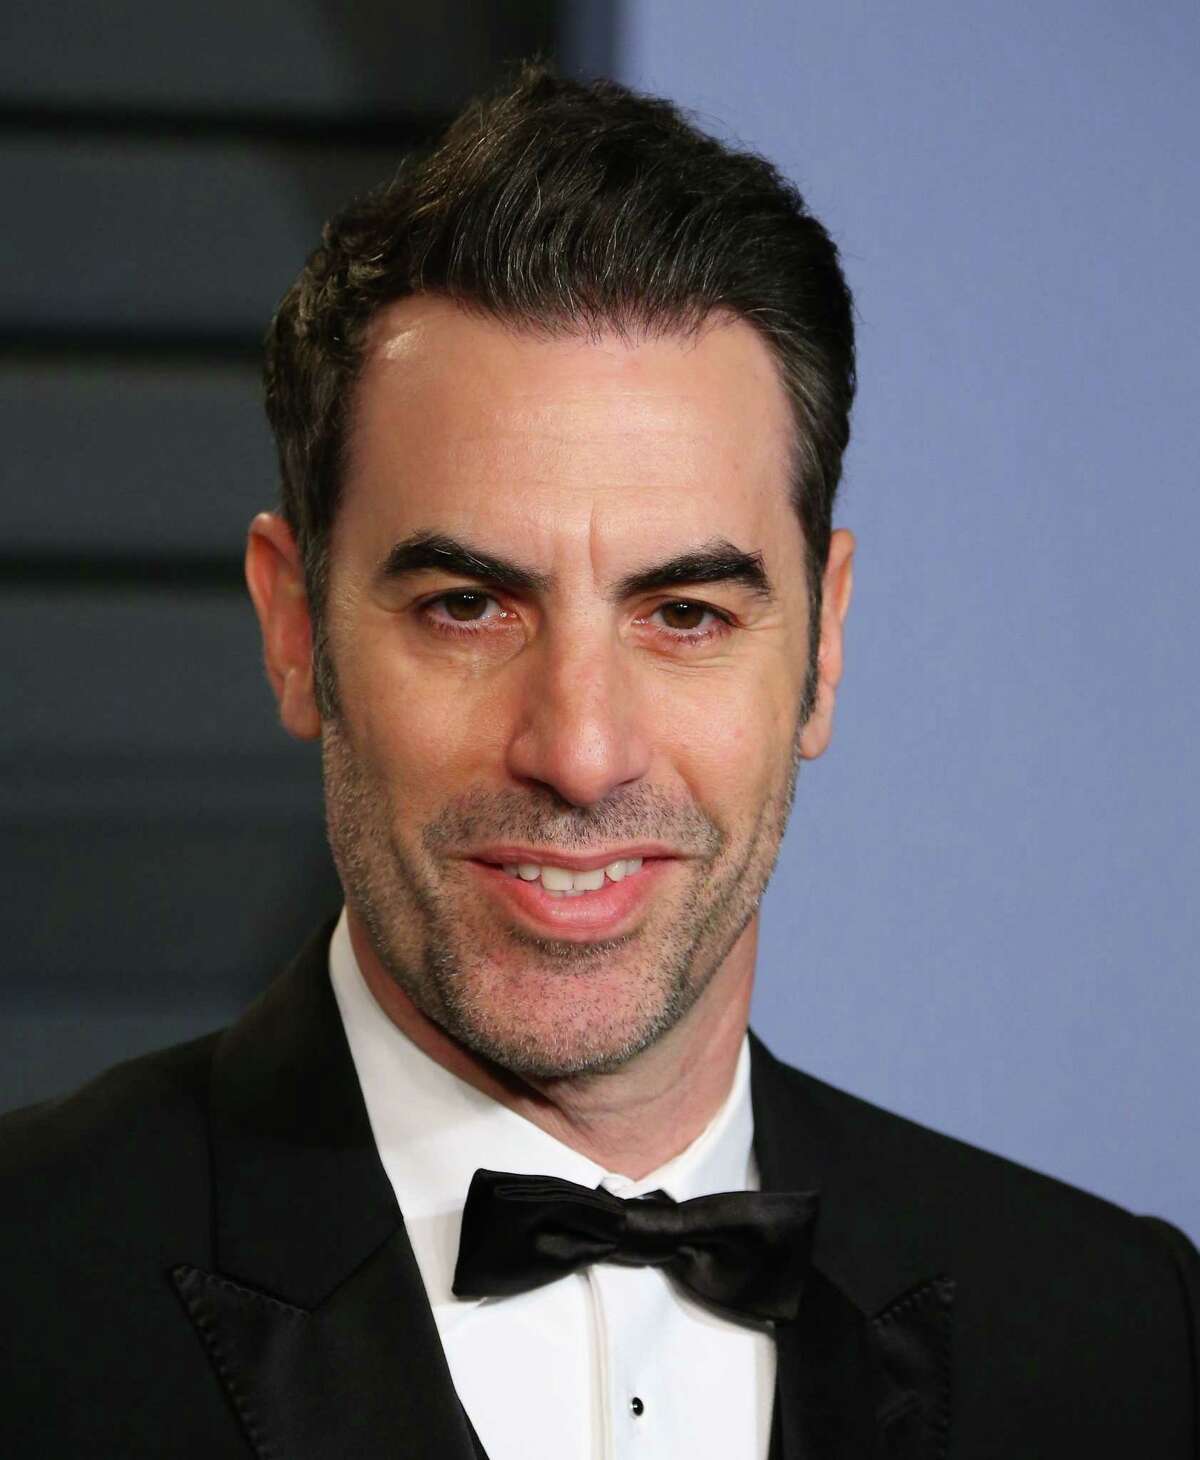 (FILES) In this file photo taken on March 4, 2018, Sacha Baron Cohen attends the 2018 Vanity Fair Oscar Party at The Wallis Annenberg Center for the Performing Arts in Beverly Hills, California. Jason Spencer, a Republican member of the Georgia House of Representatives, is resigning after a humiliating appearance on comedian Sacha Baron Cohen's television show during which he exposed himself and shouted racial slurs. Spencer had been under pressure from his own party to step down following the embarrassing appearance on Cohen's series "Who Is America?" / AFP PHOTO / JEAN-BAPTISTE LACROIXJEAN-BAPTISTE LACROIX/AFP/Getty Images